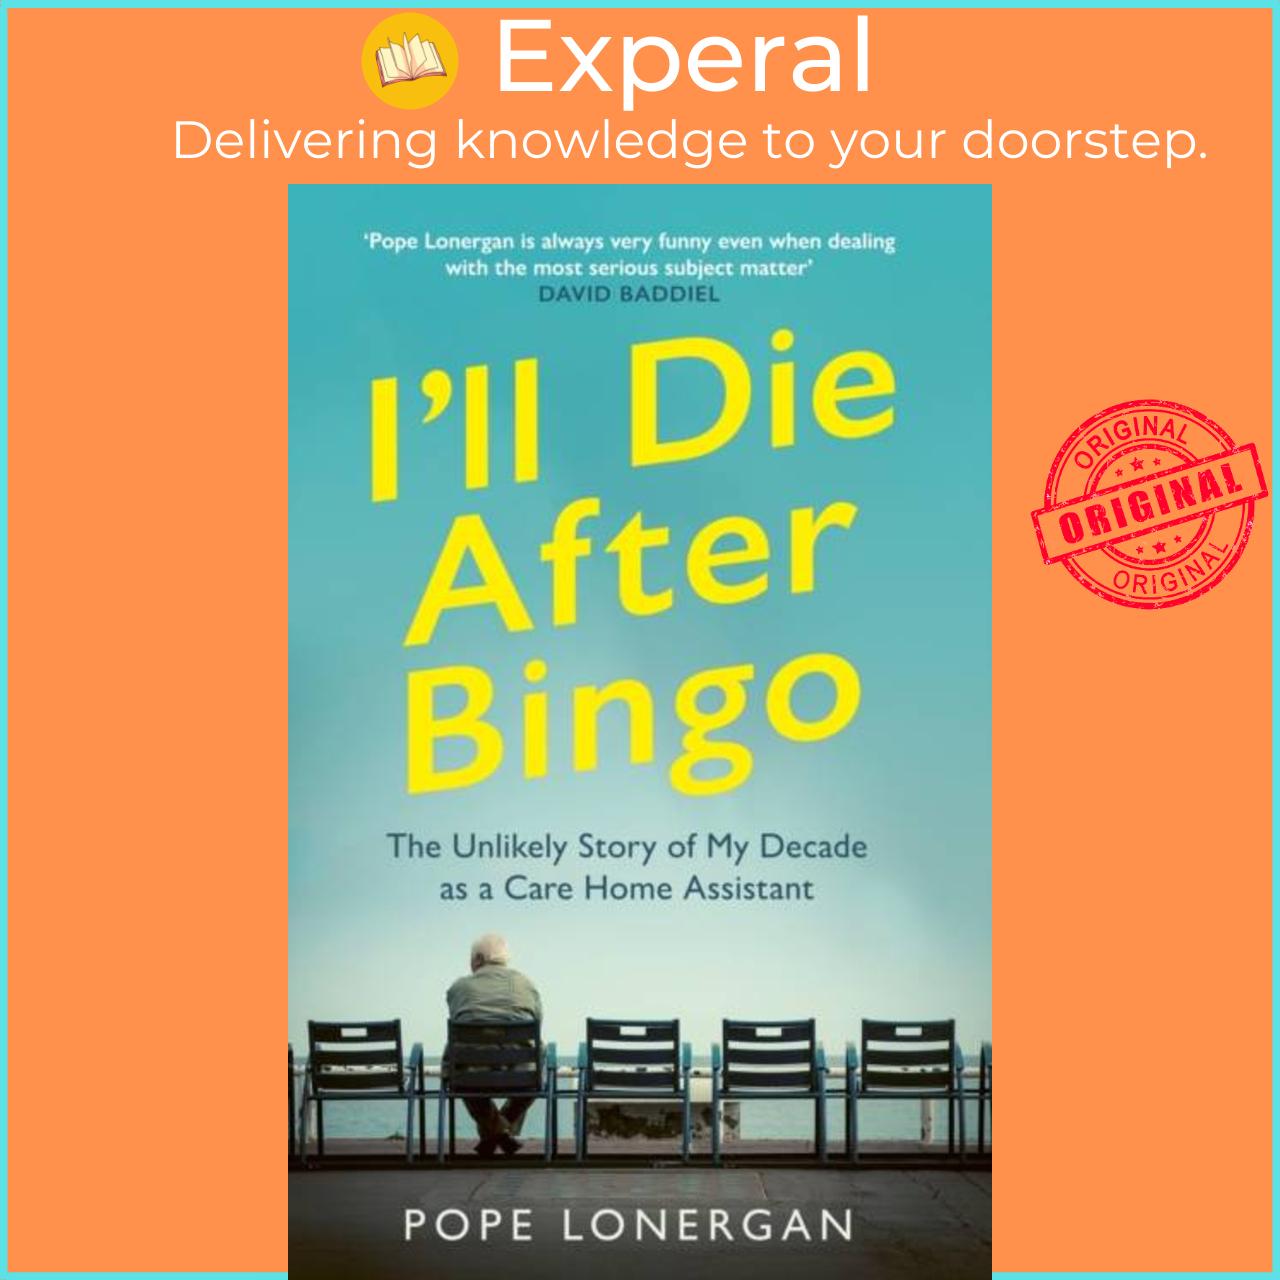 Sách - I'll Die After Bingo - My unlikely life as a care home assistant by Pope Lonergan (UK edition, paperback)